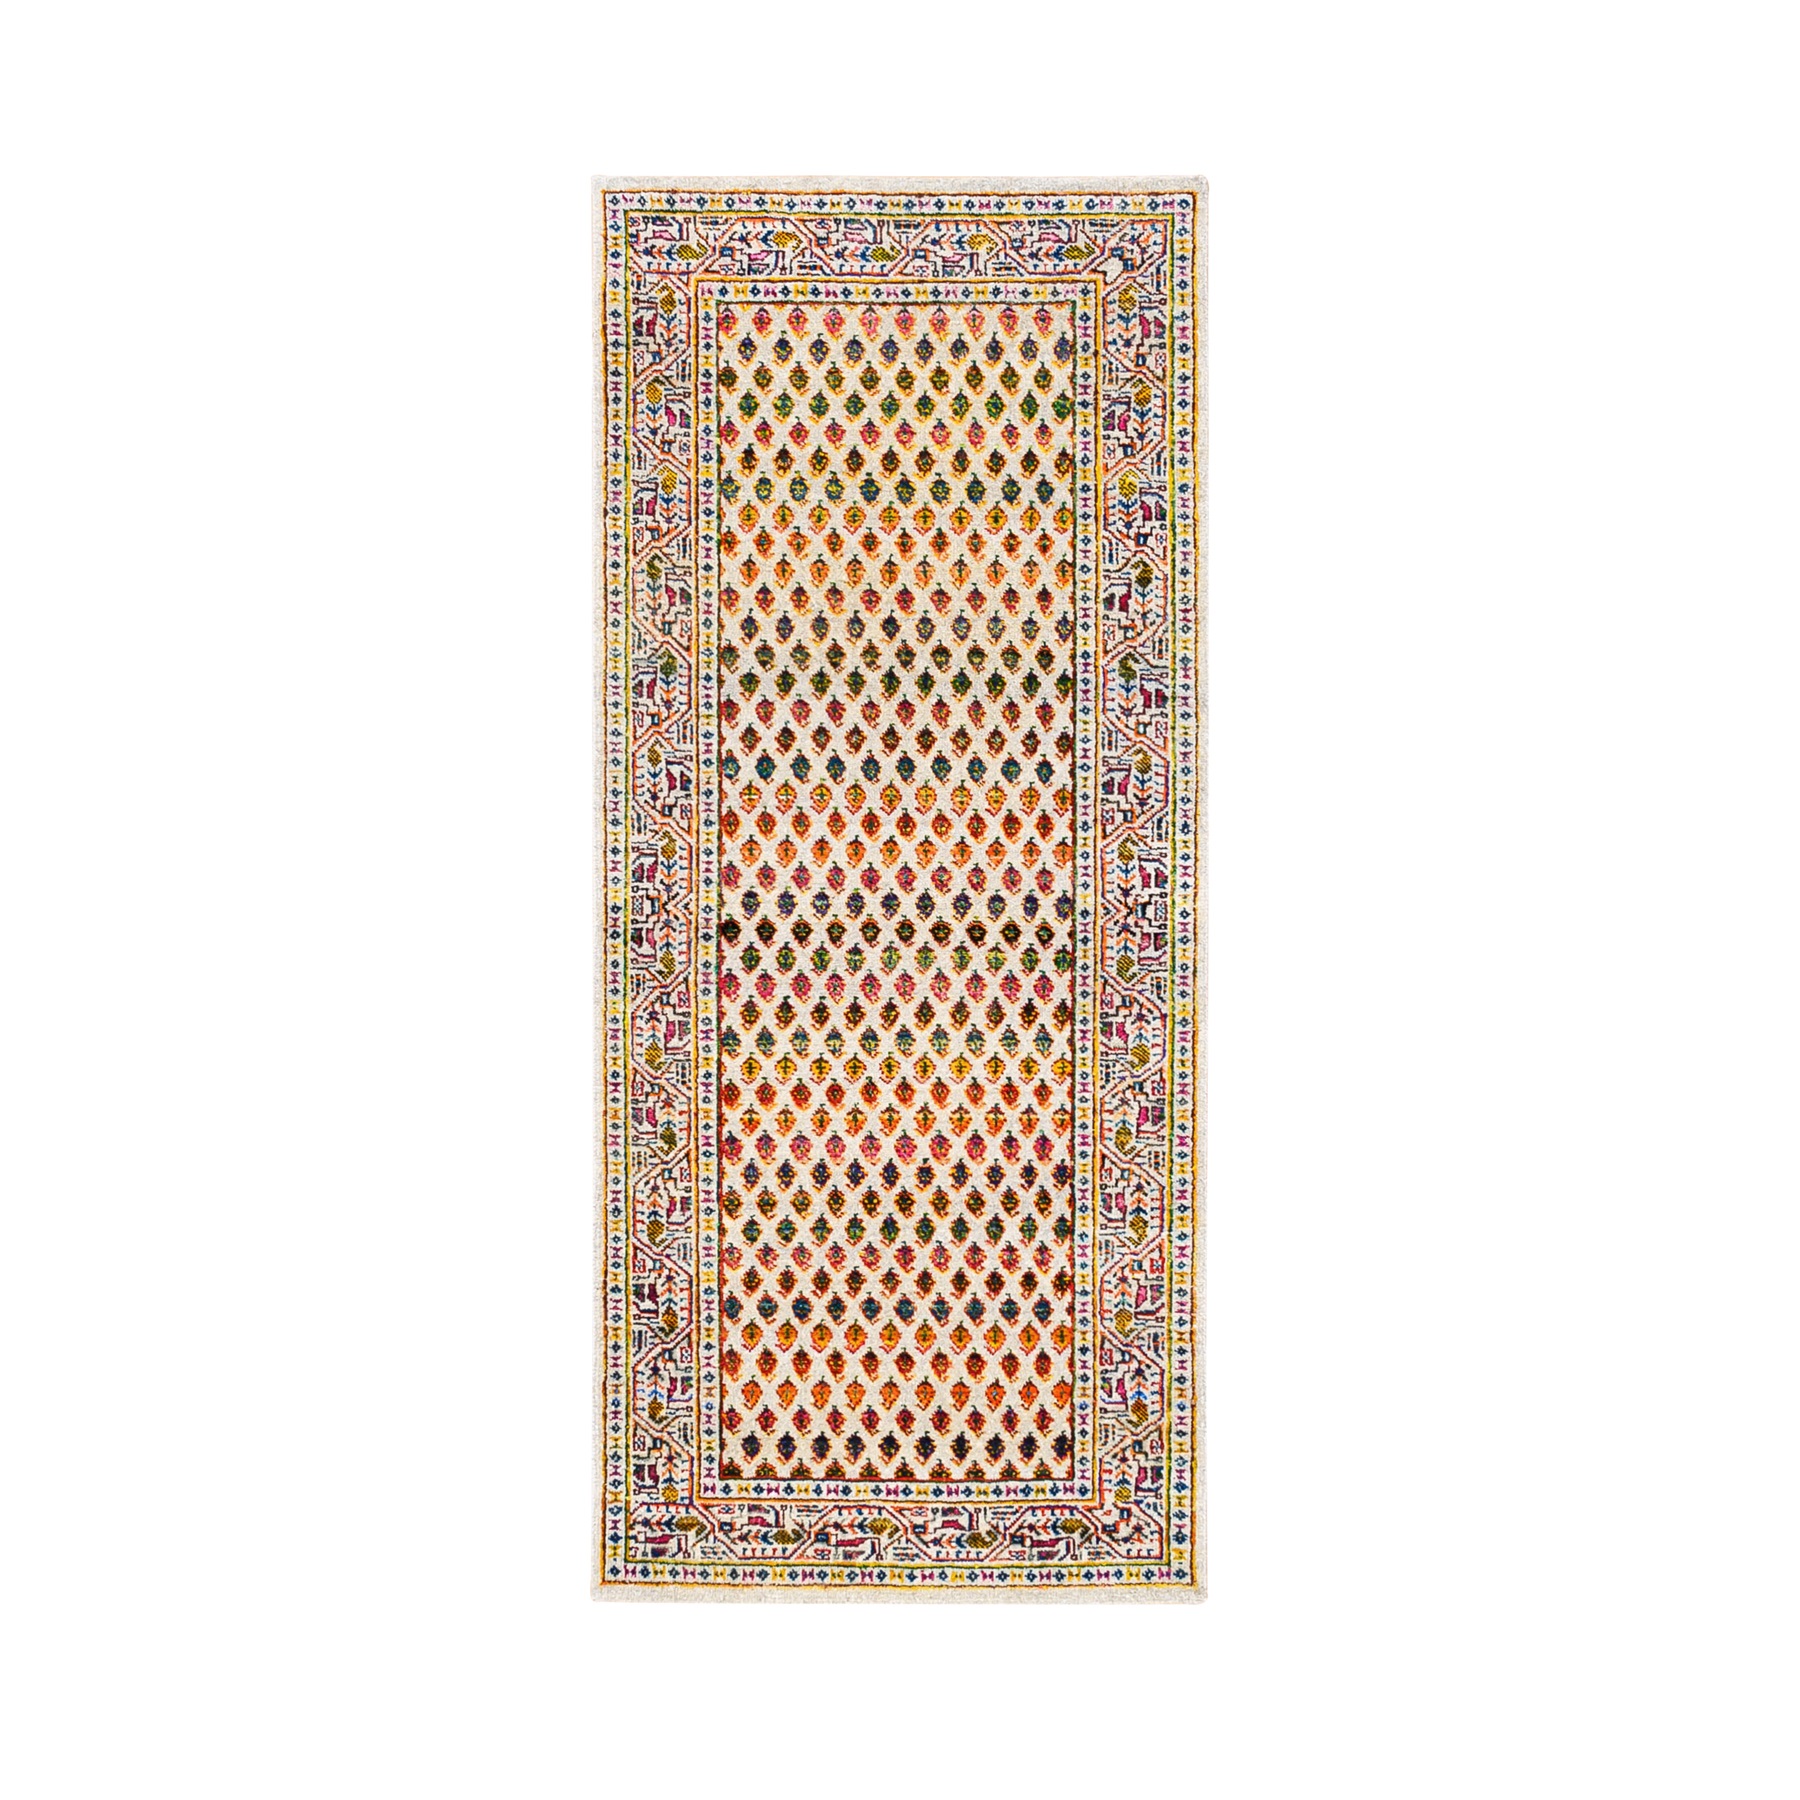 2'6"x6' Colorful Wool And Sari Silk Sarouk Mir Inspired With Small Boteh Design Hand Woven Oriental Runner Rug 